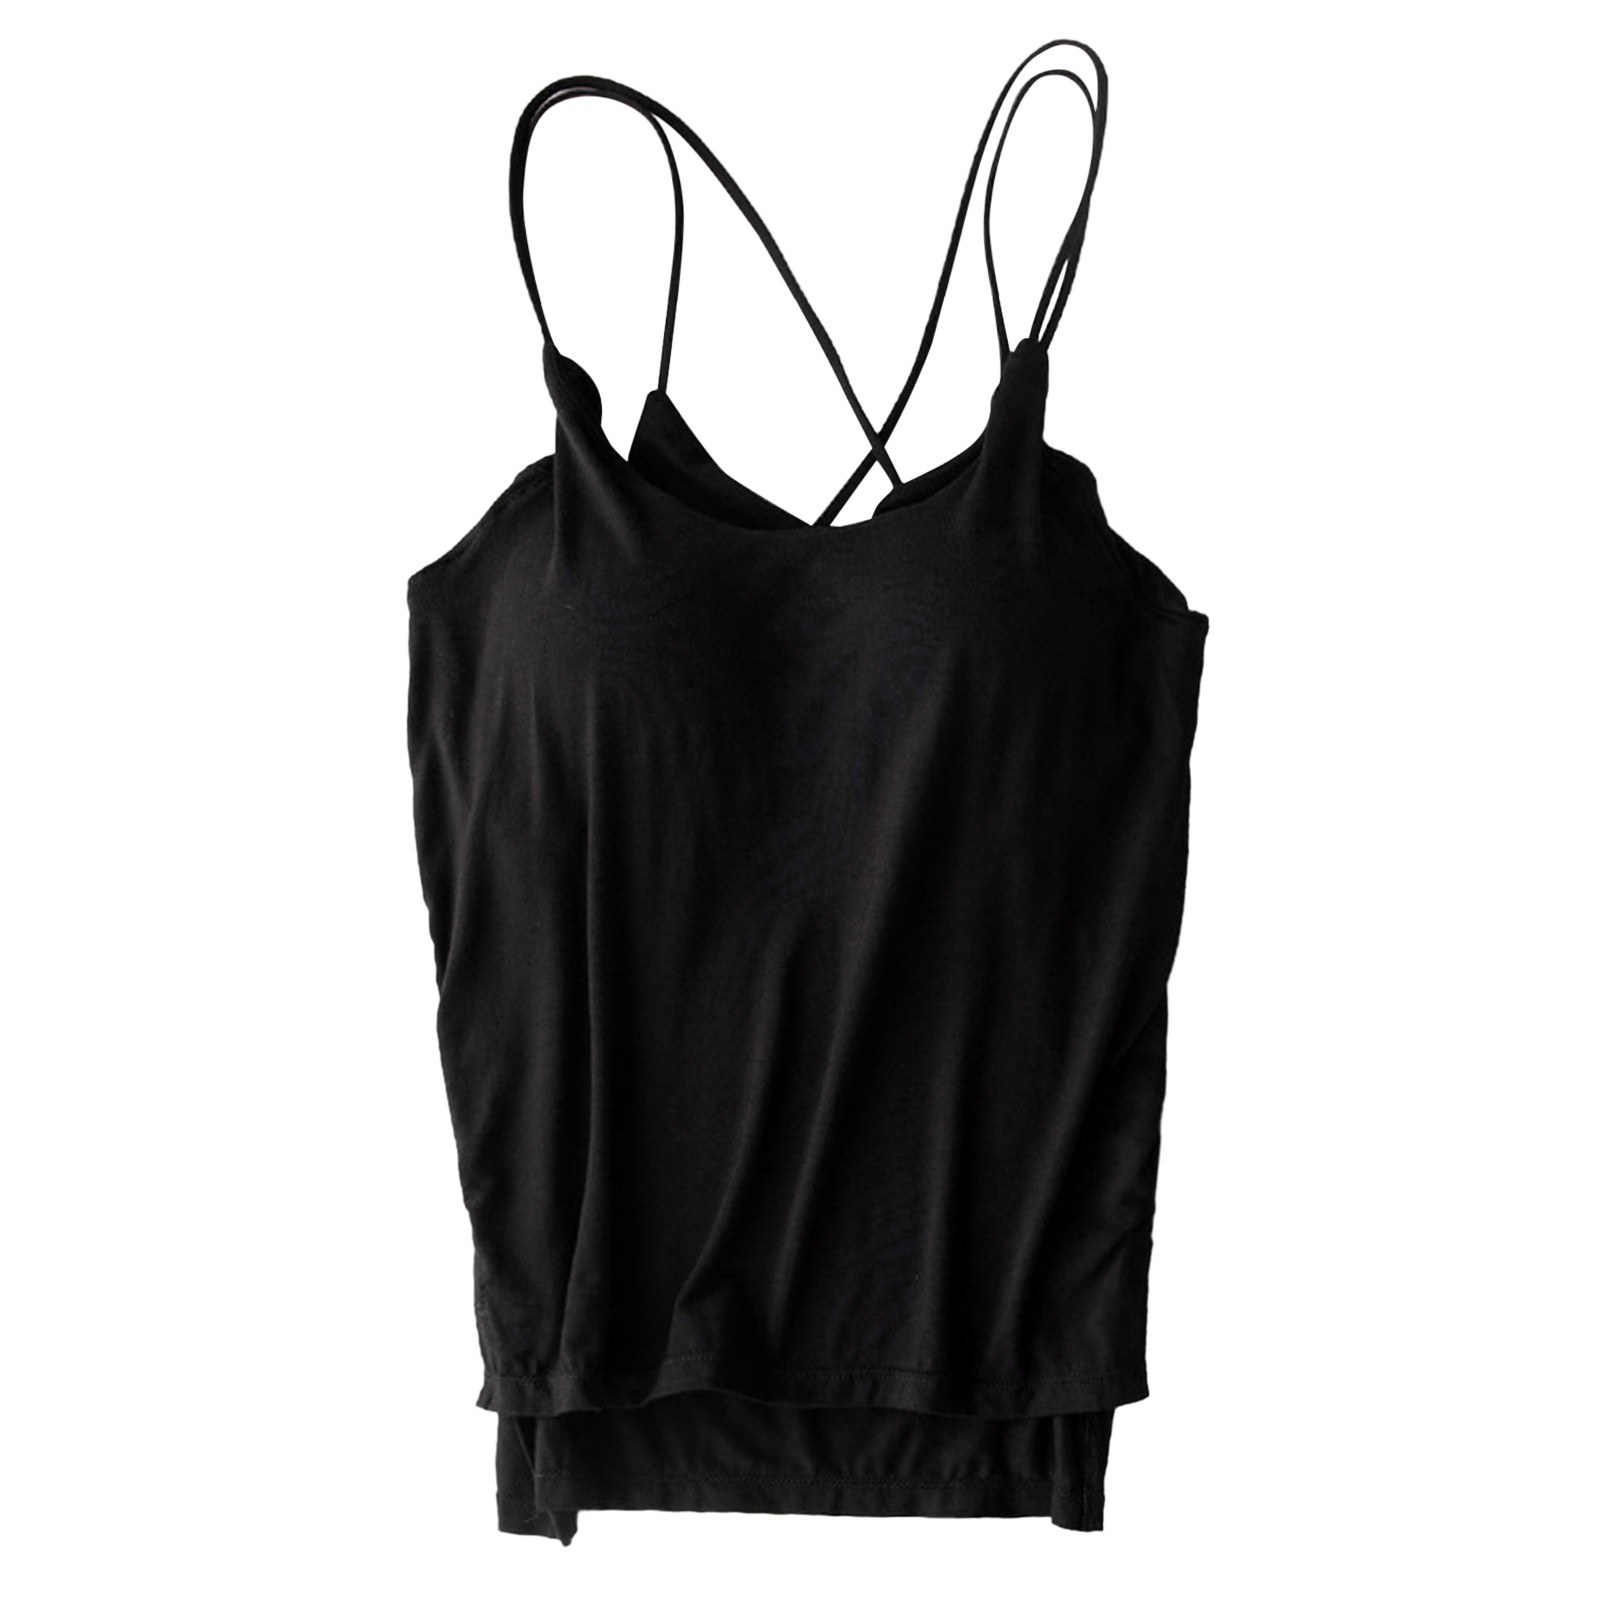 Baberdicy Camisole Top Clearance！Women's Solid Color V Neck Beauty Back ...